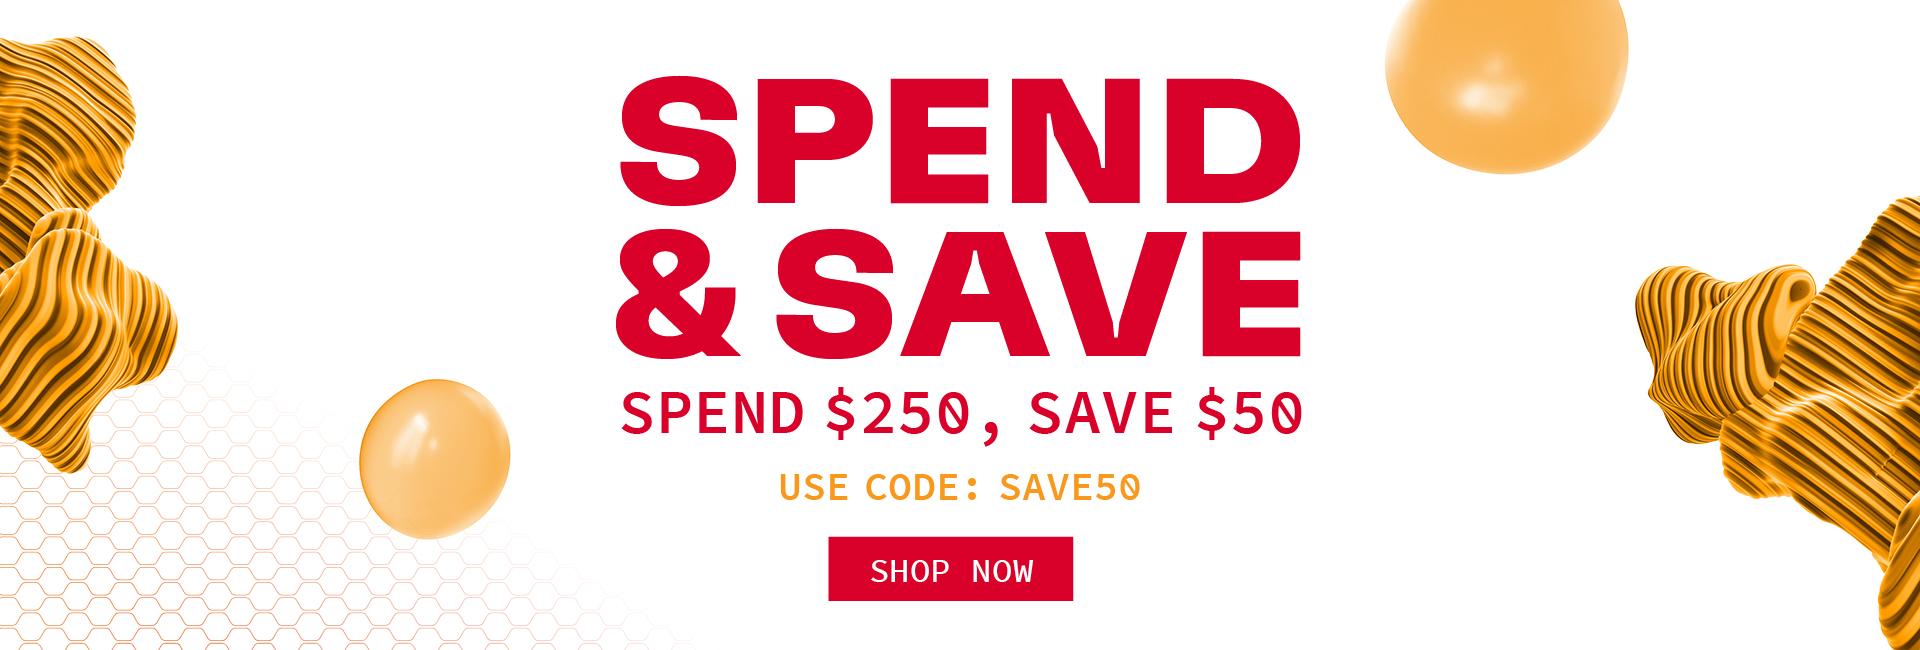 Timberland extra $50 OFF $250 on boots, hiking, boat shoes, clothing with promo code